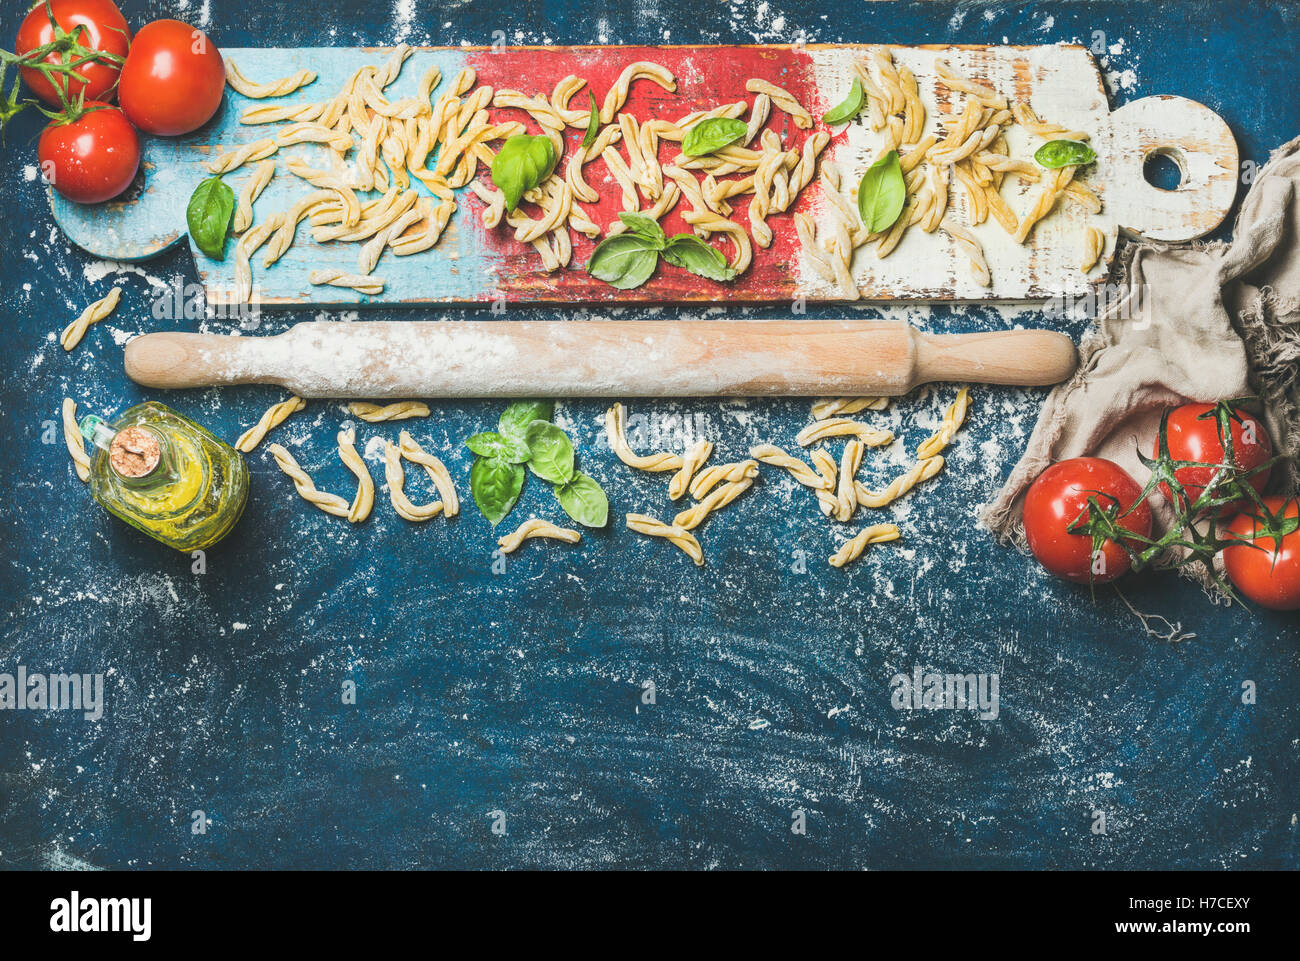 Ingredients for cooking Italian dinner. Fresh pasta casarecce, tomatoes, basil leaves and bottle of olive oil on colorful painte Stock Photo